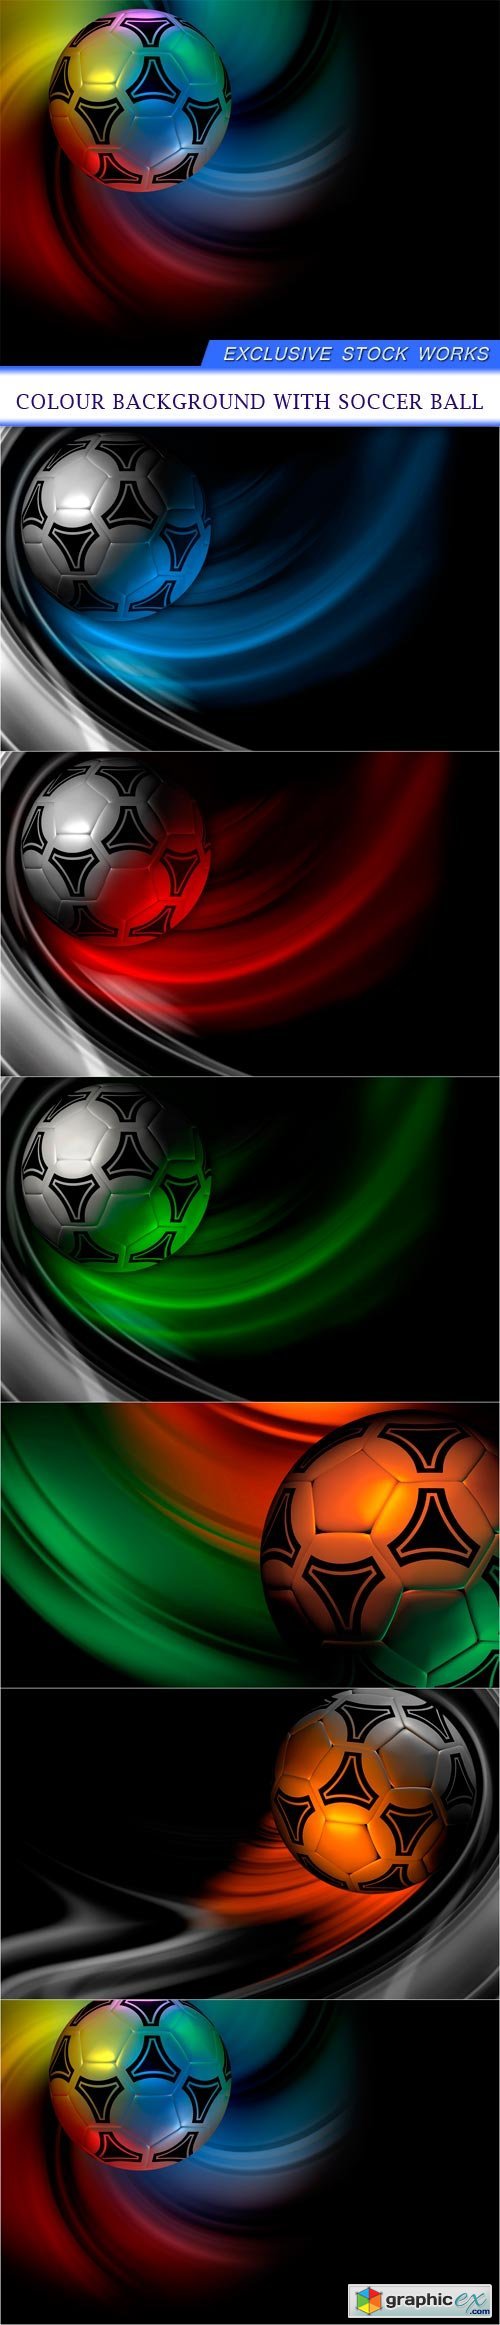 Colour background with soccer ball 6X JPEG